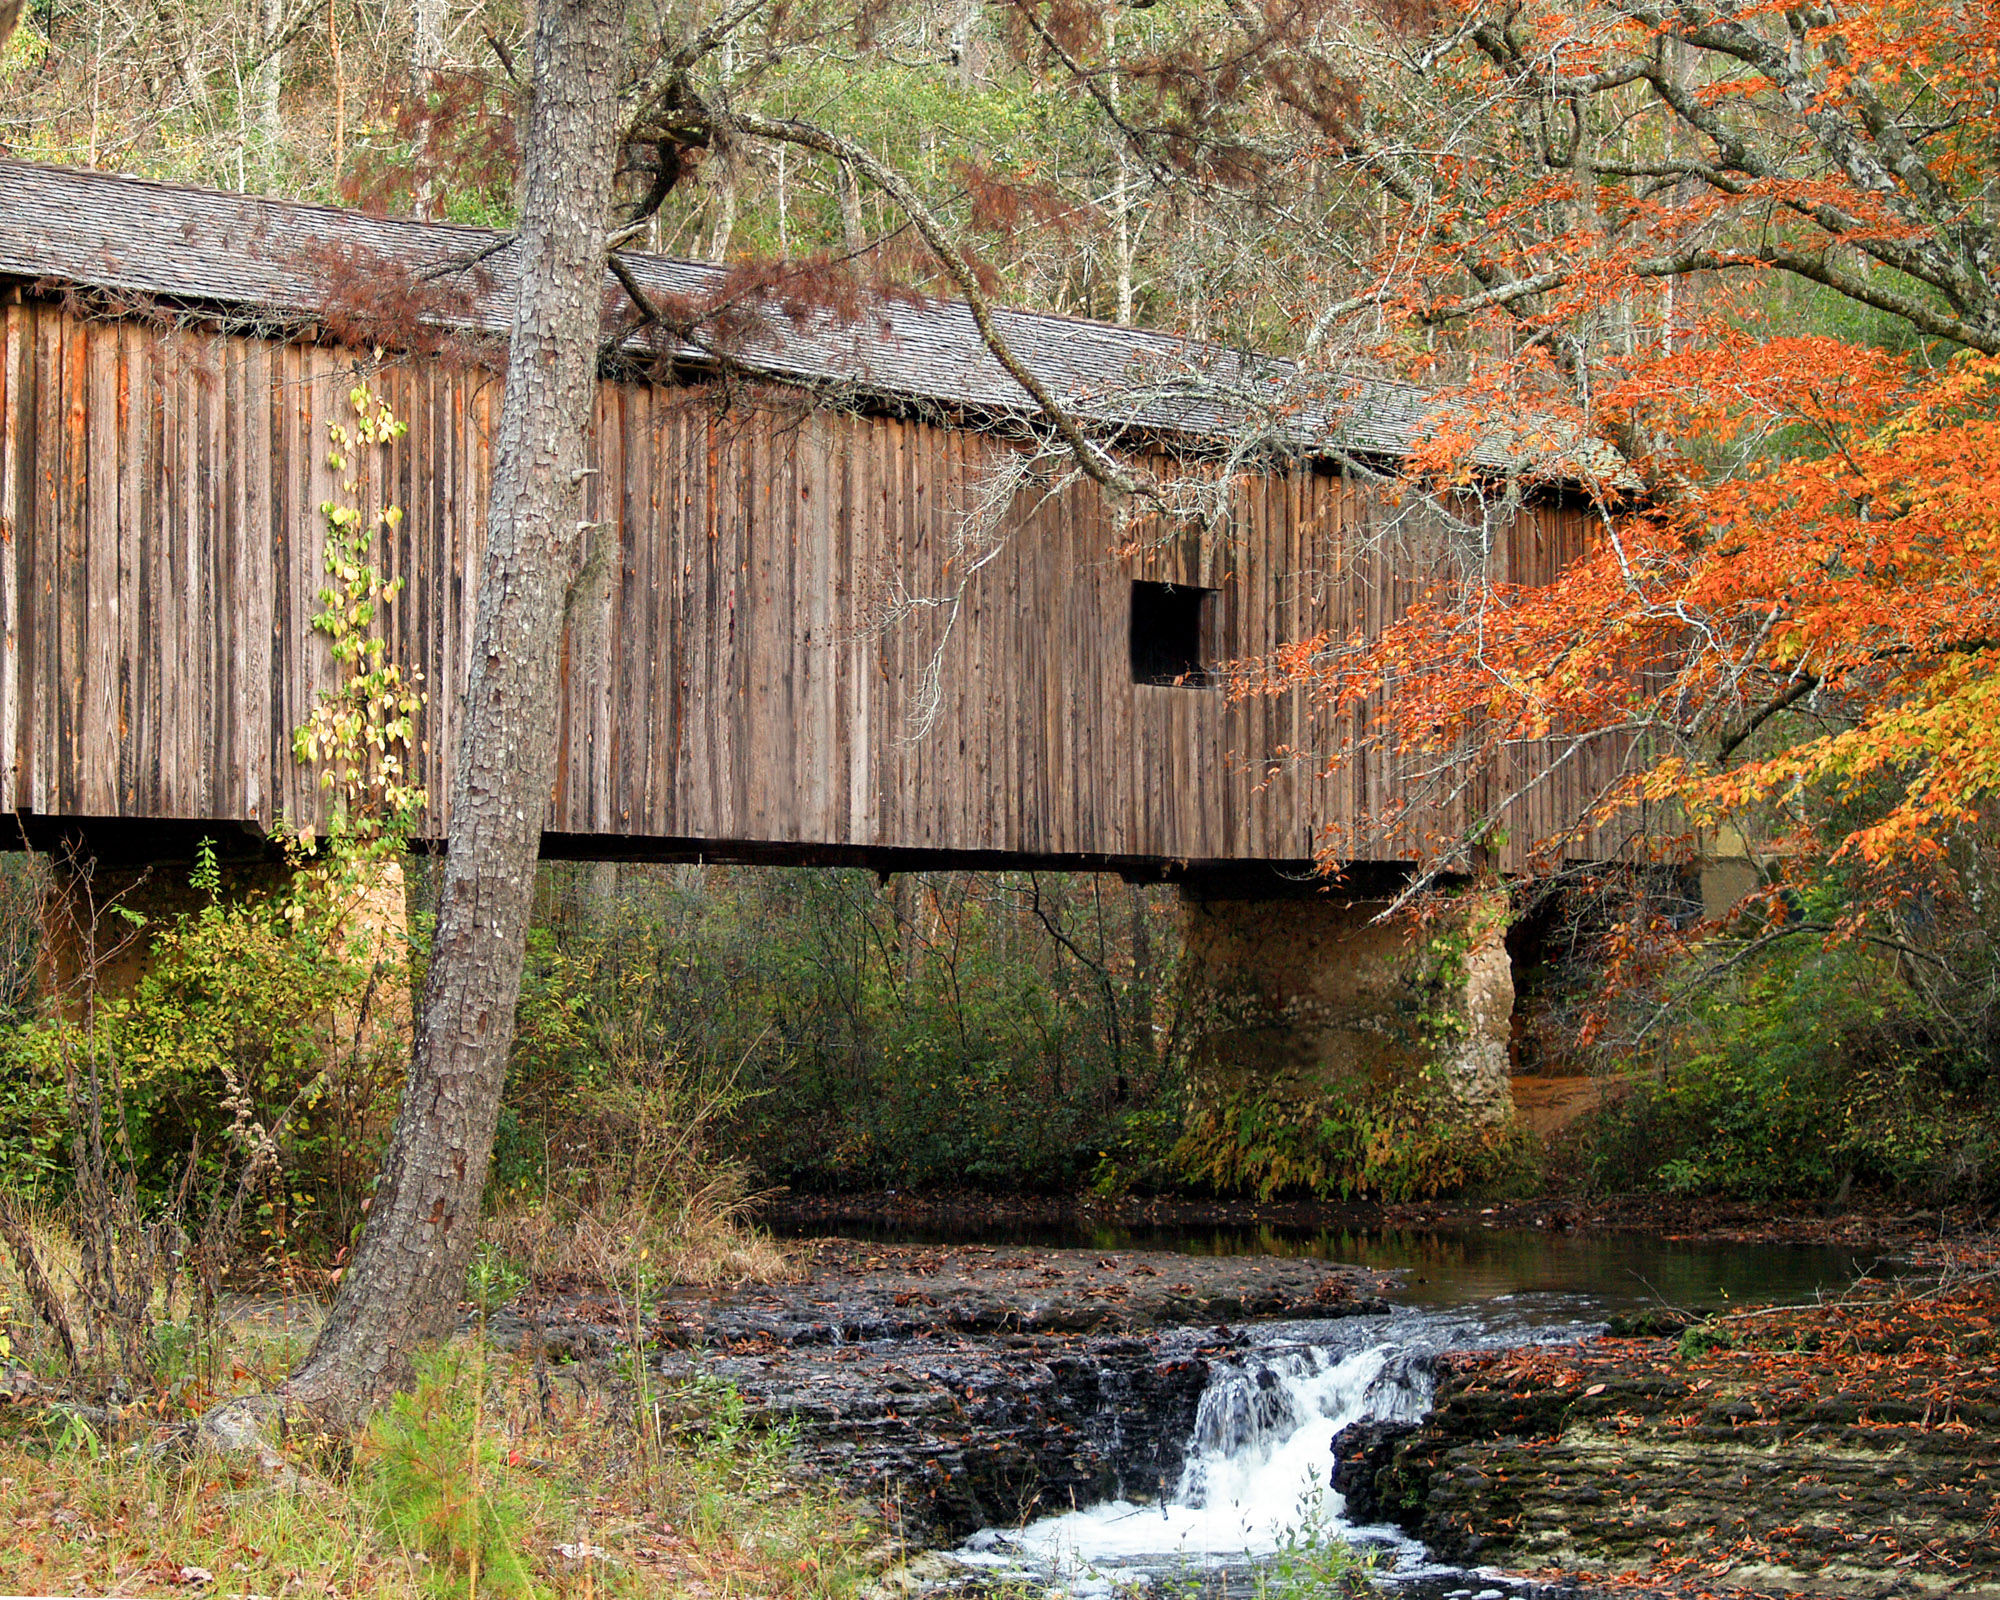 Visit our #1 attraction! Located nine miles southwest of Blakely, in Early County, the Coheelee Creek Covered Bridge is the southernmost covered bridge in the United States. It was built in 1891 and is listed on the National Register of Historic Places. 